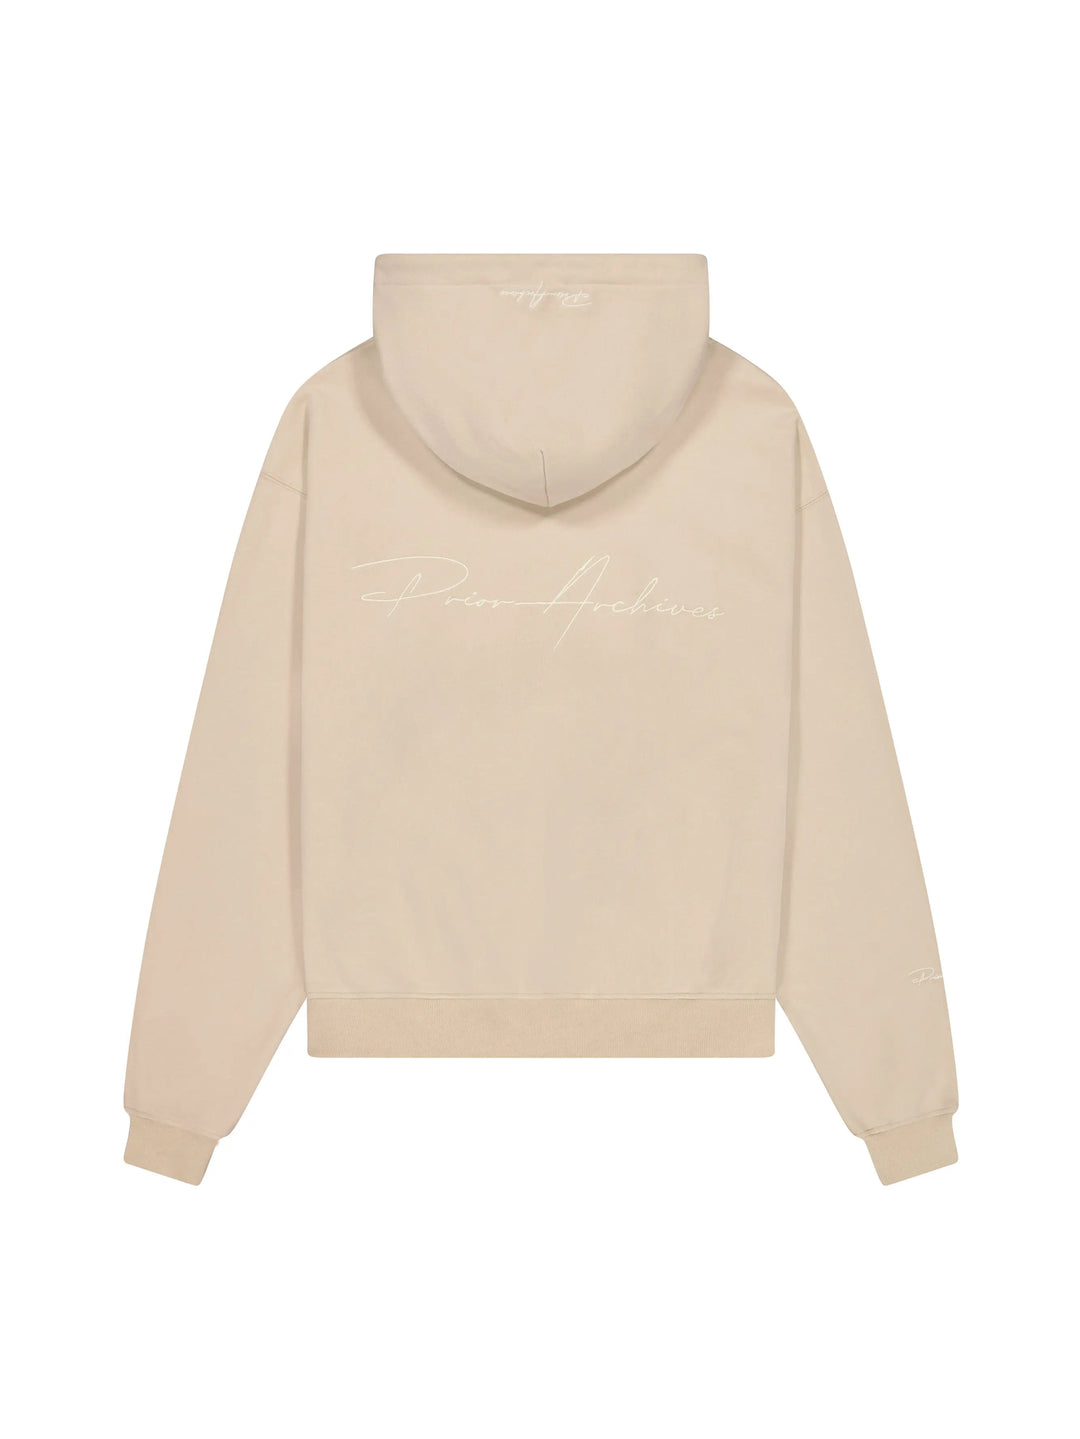 Prior Embroidery Logo Oversized Hoodie Sesame in Auckland, New Zealand - Shop name